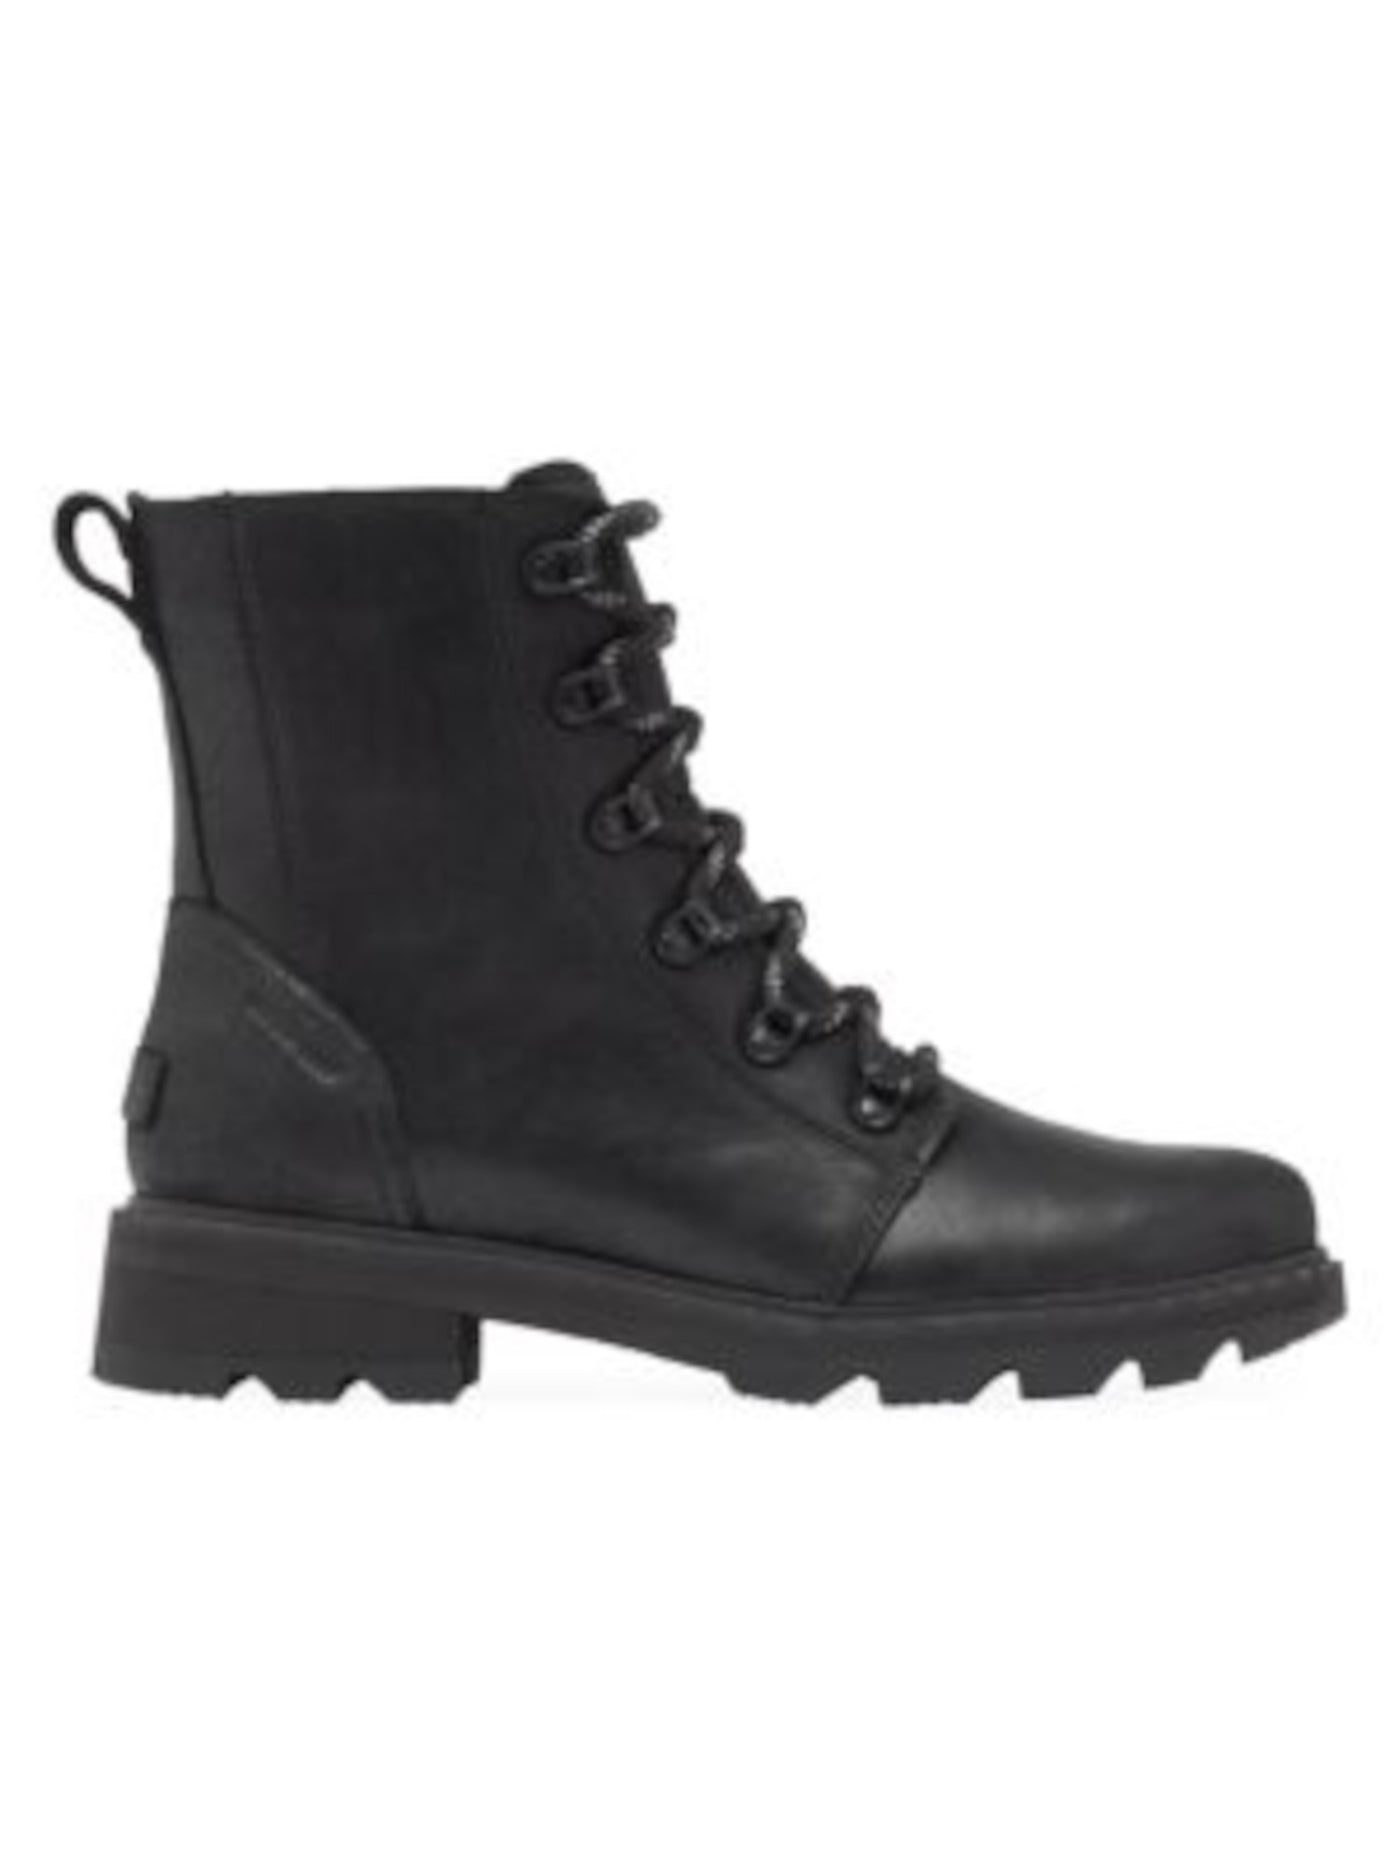 SOREL Womens Black Name At Heel Waterproof Padded Lennox Round Toe Lace-Up Leather Combat Boots 7.5